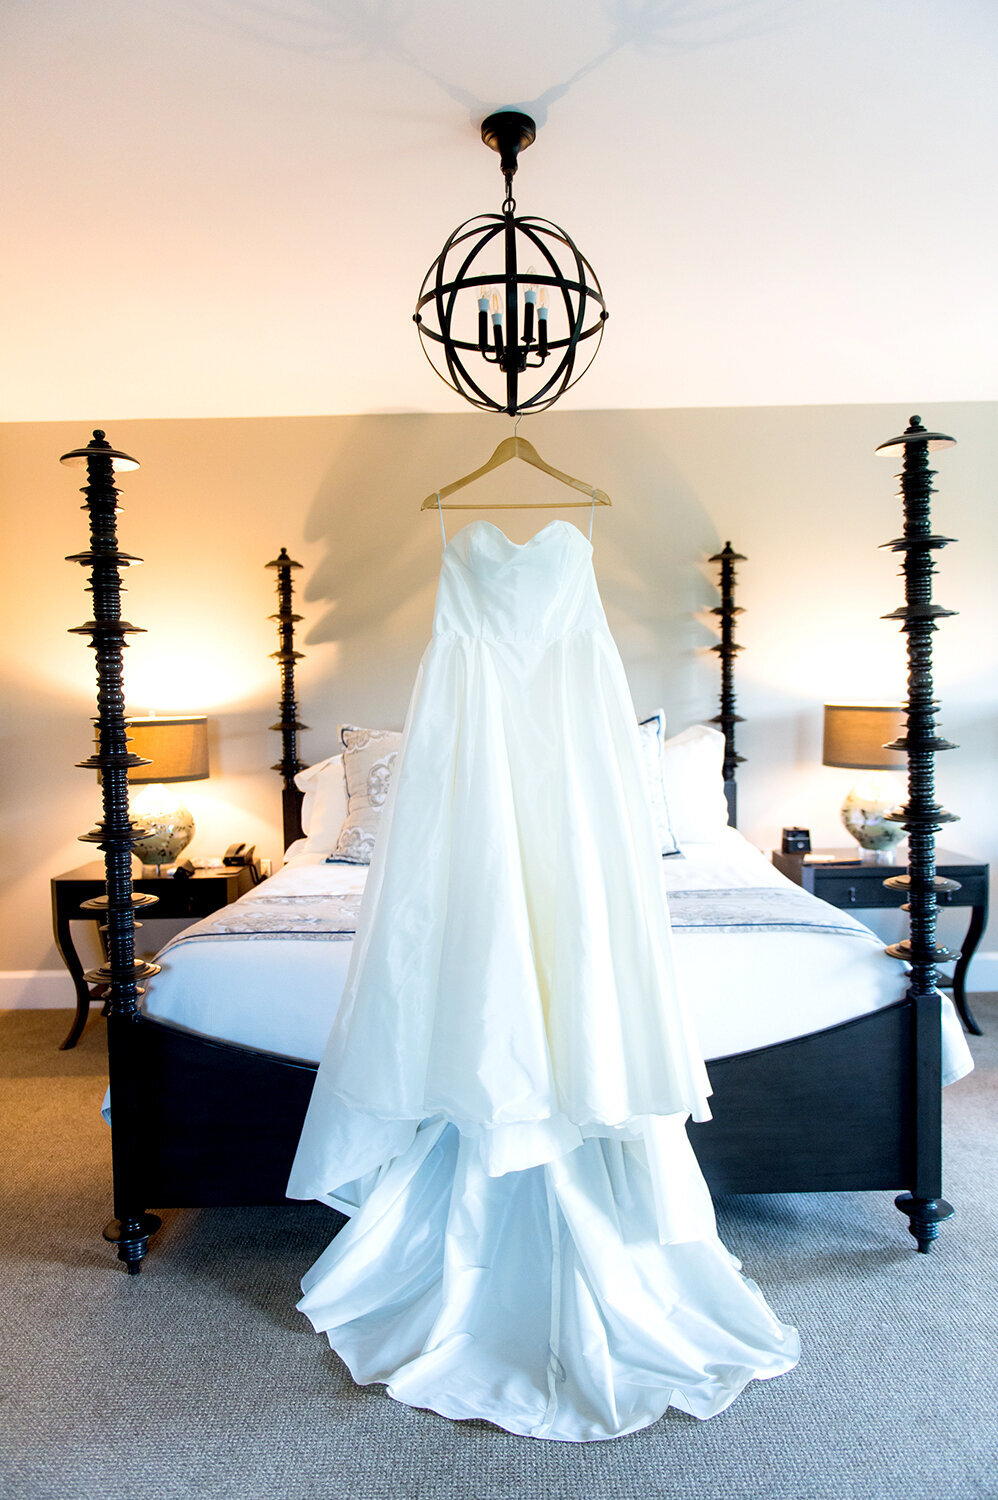 The Grand Hotel Wedding Gown displayed in Hotel Room at the Grand at the Bedford Village Inn, Bedford, NH Artifact Images